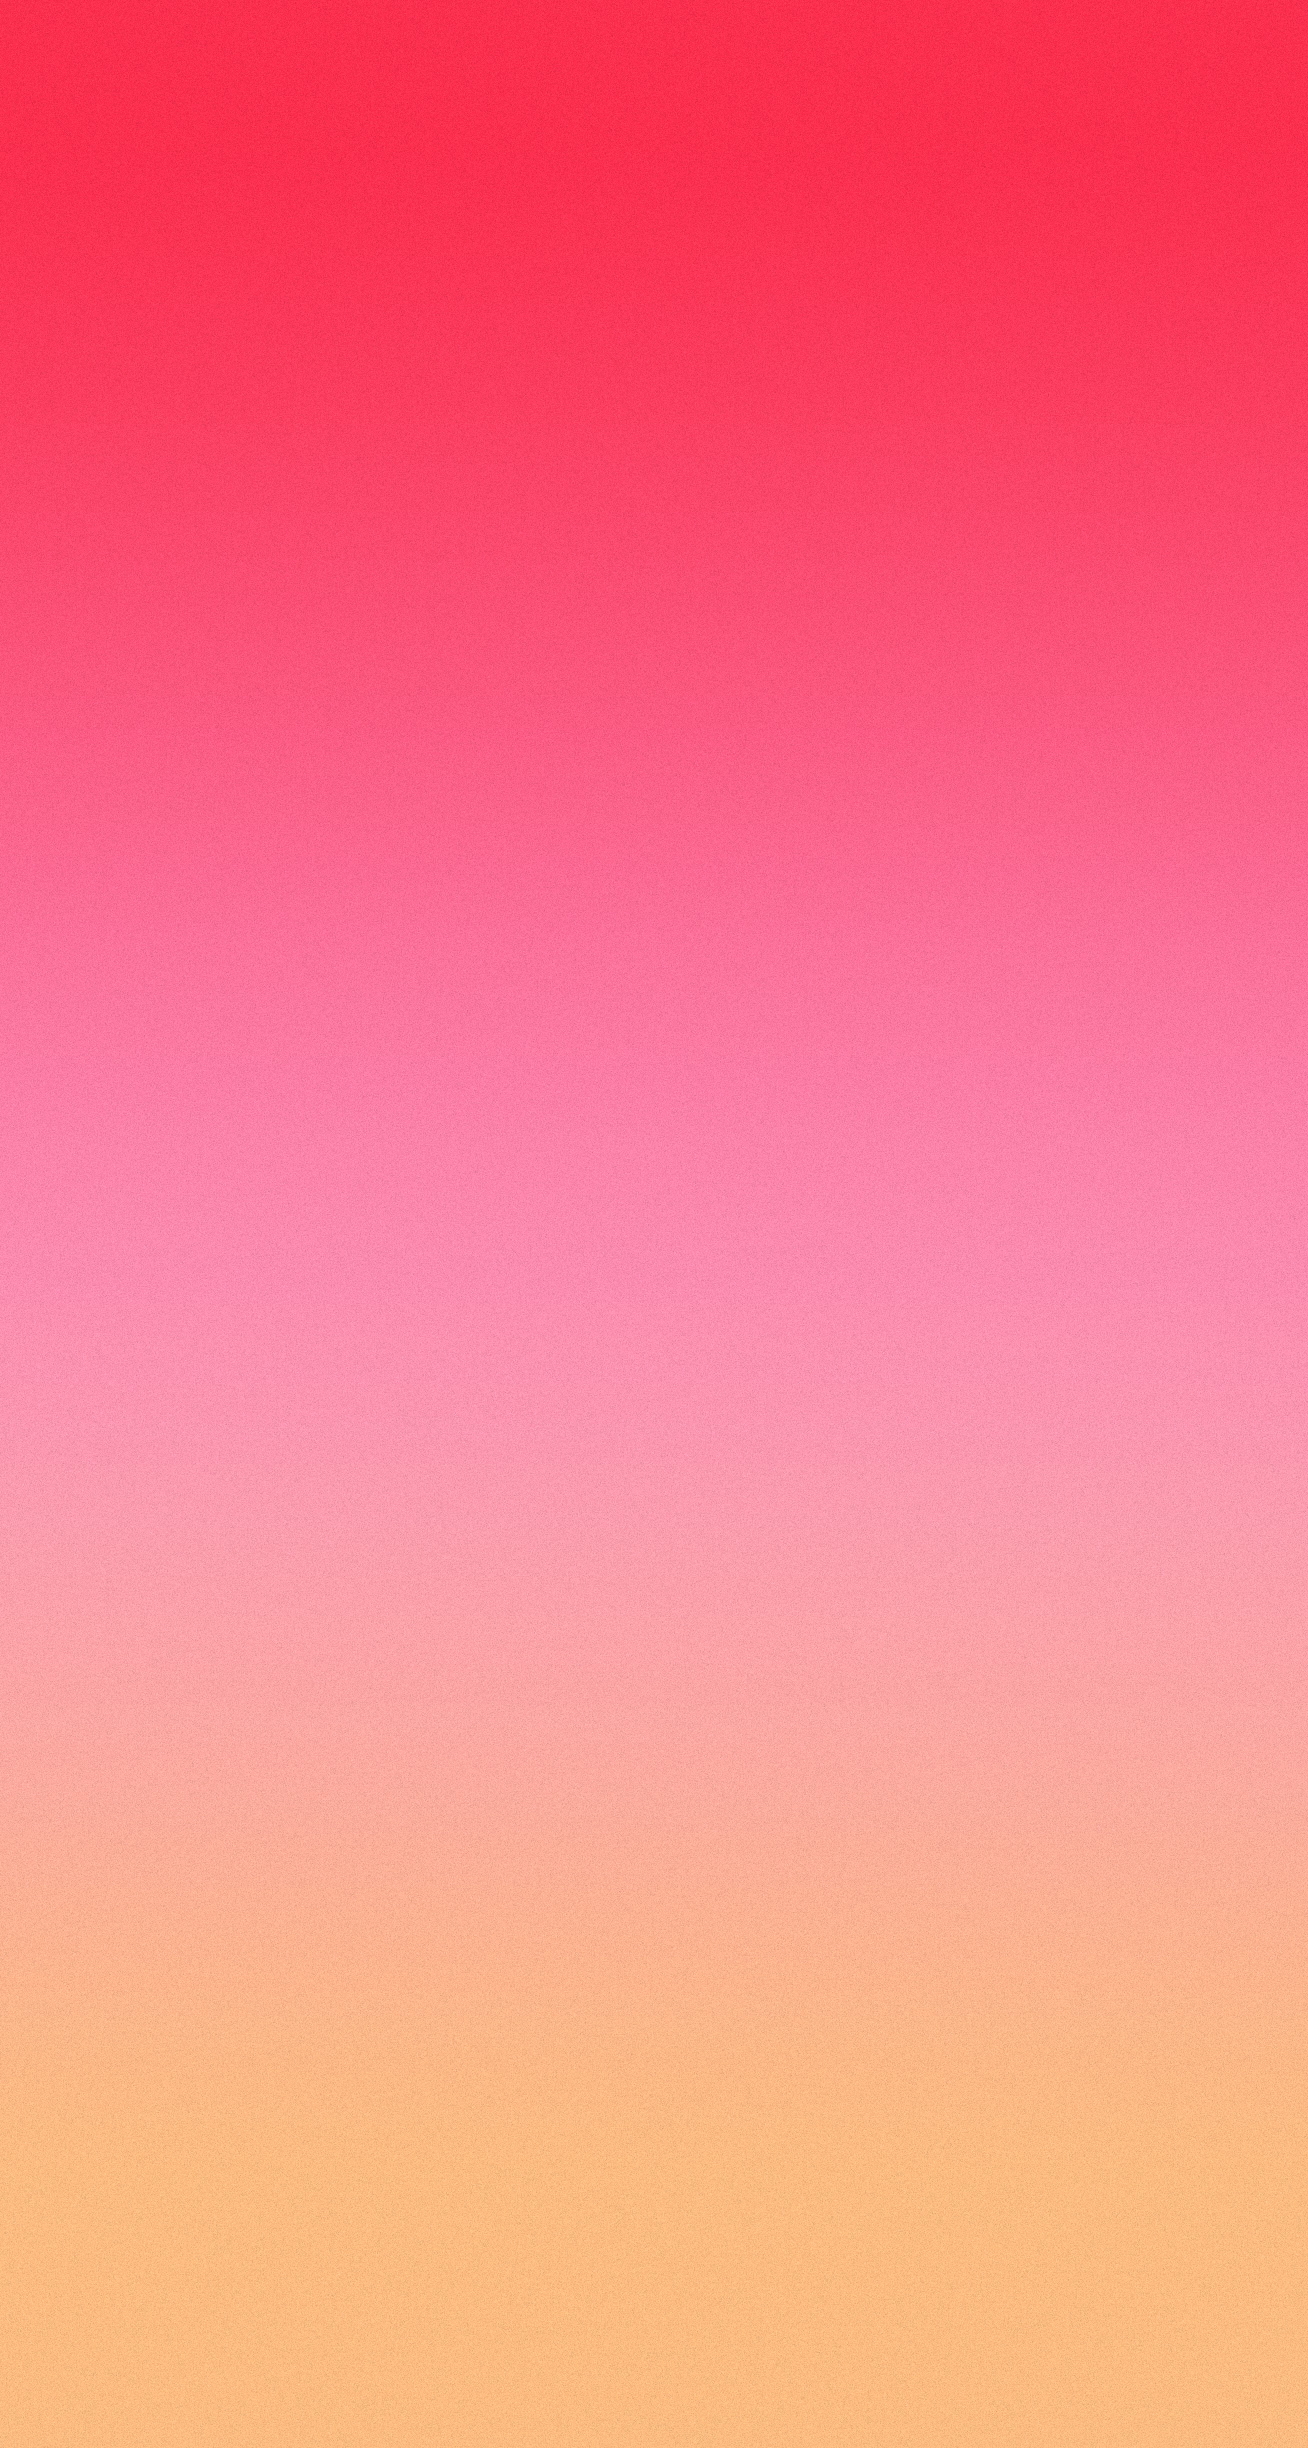 Pink And Orange Ombre - HD Wallpaper 